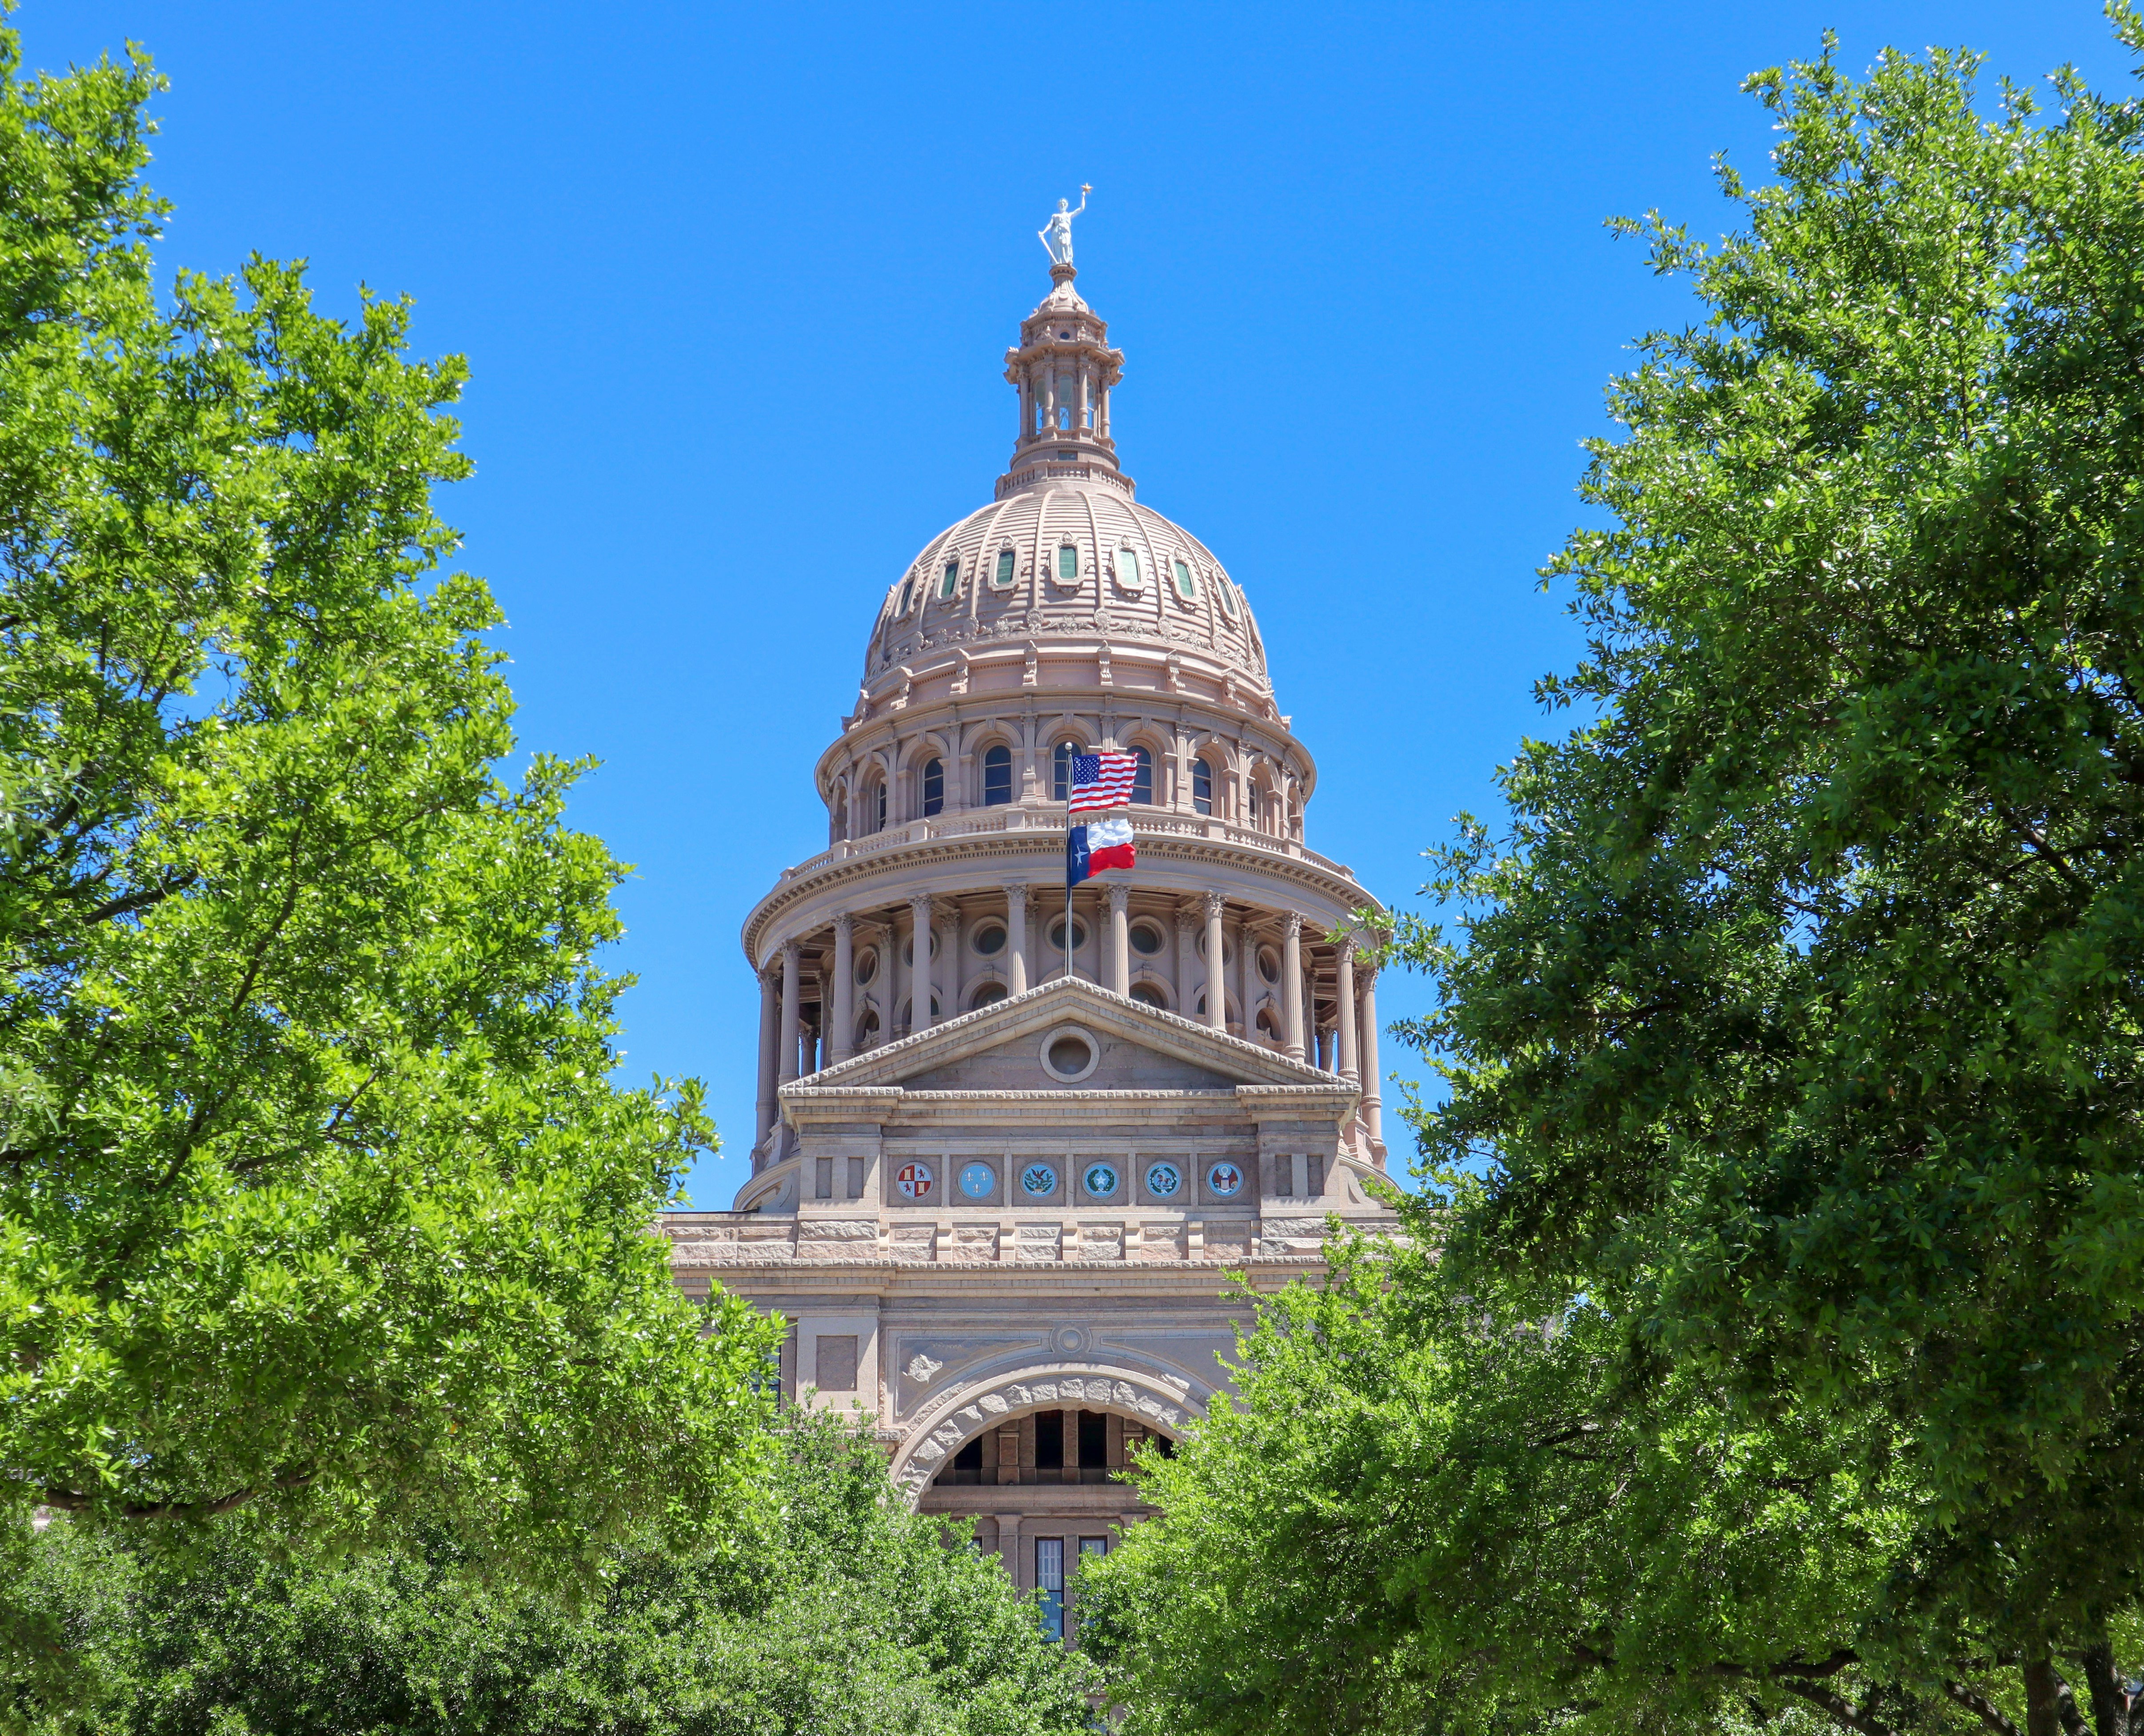 Texas's State Capital famous dome.